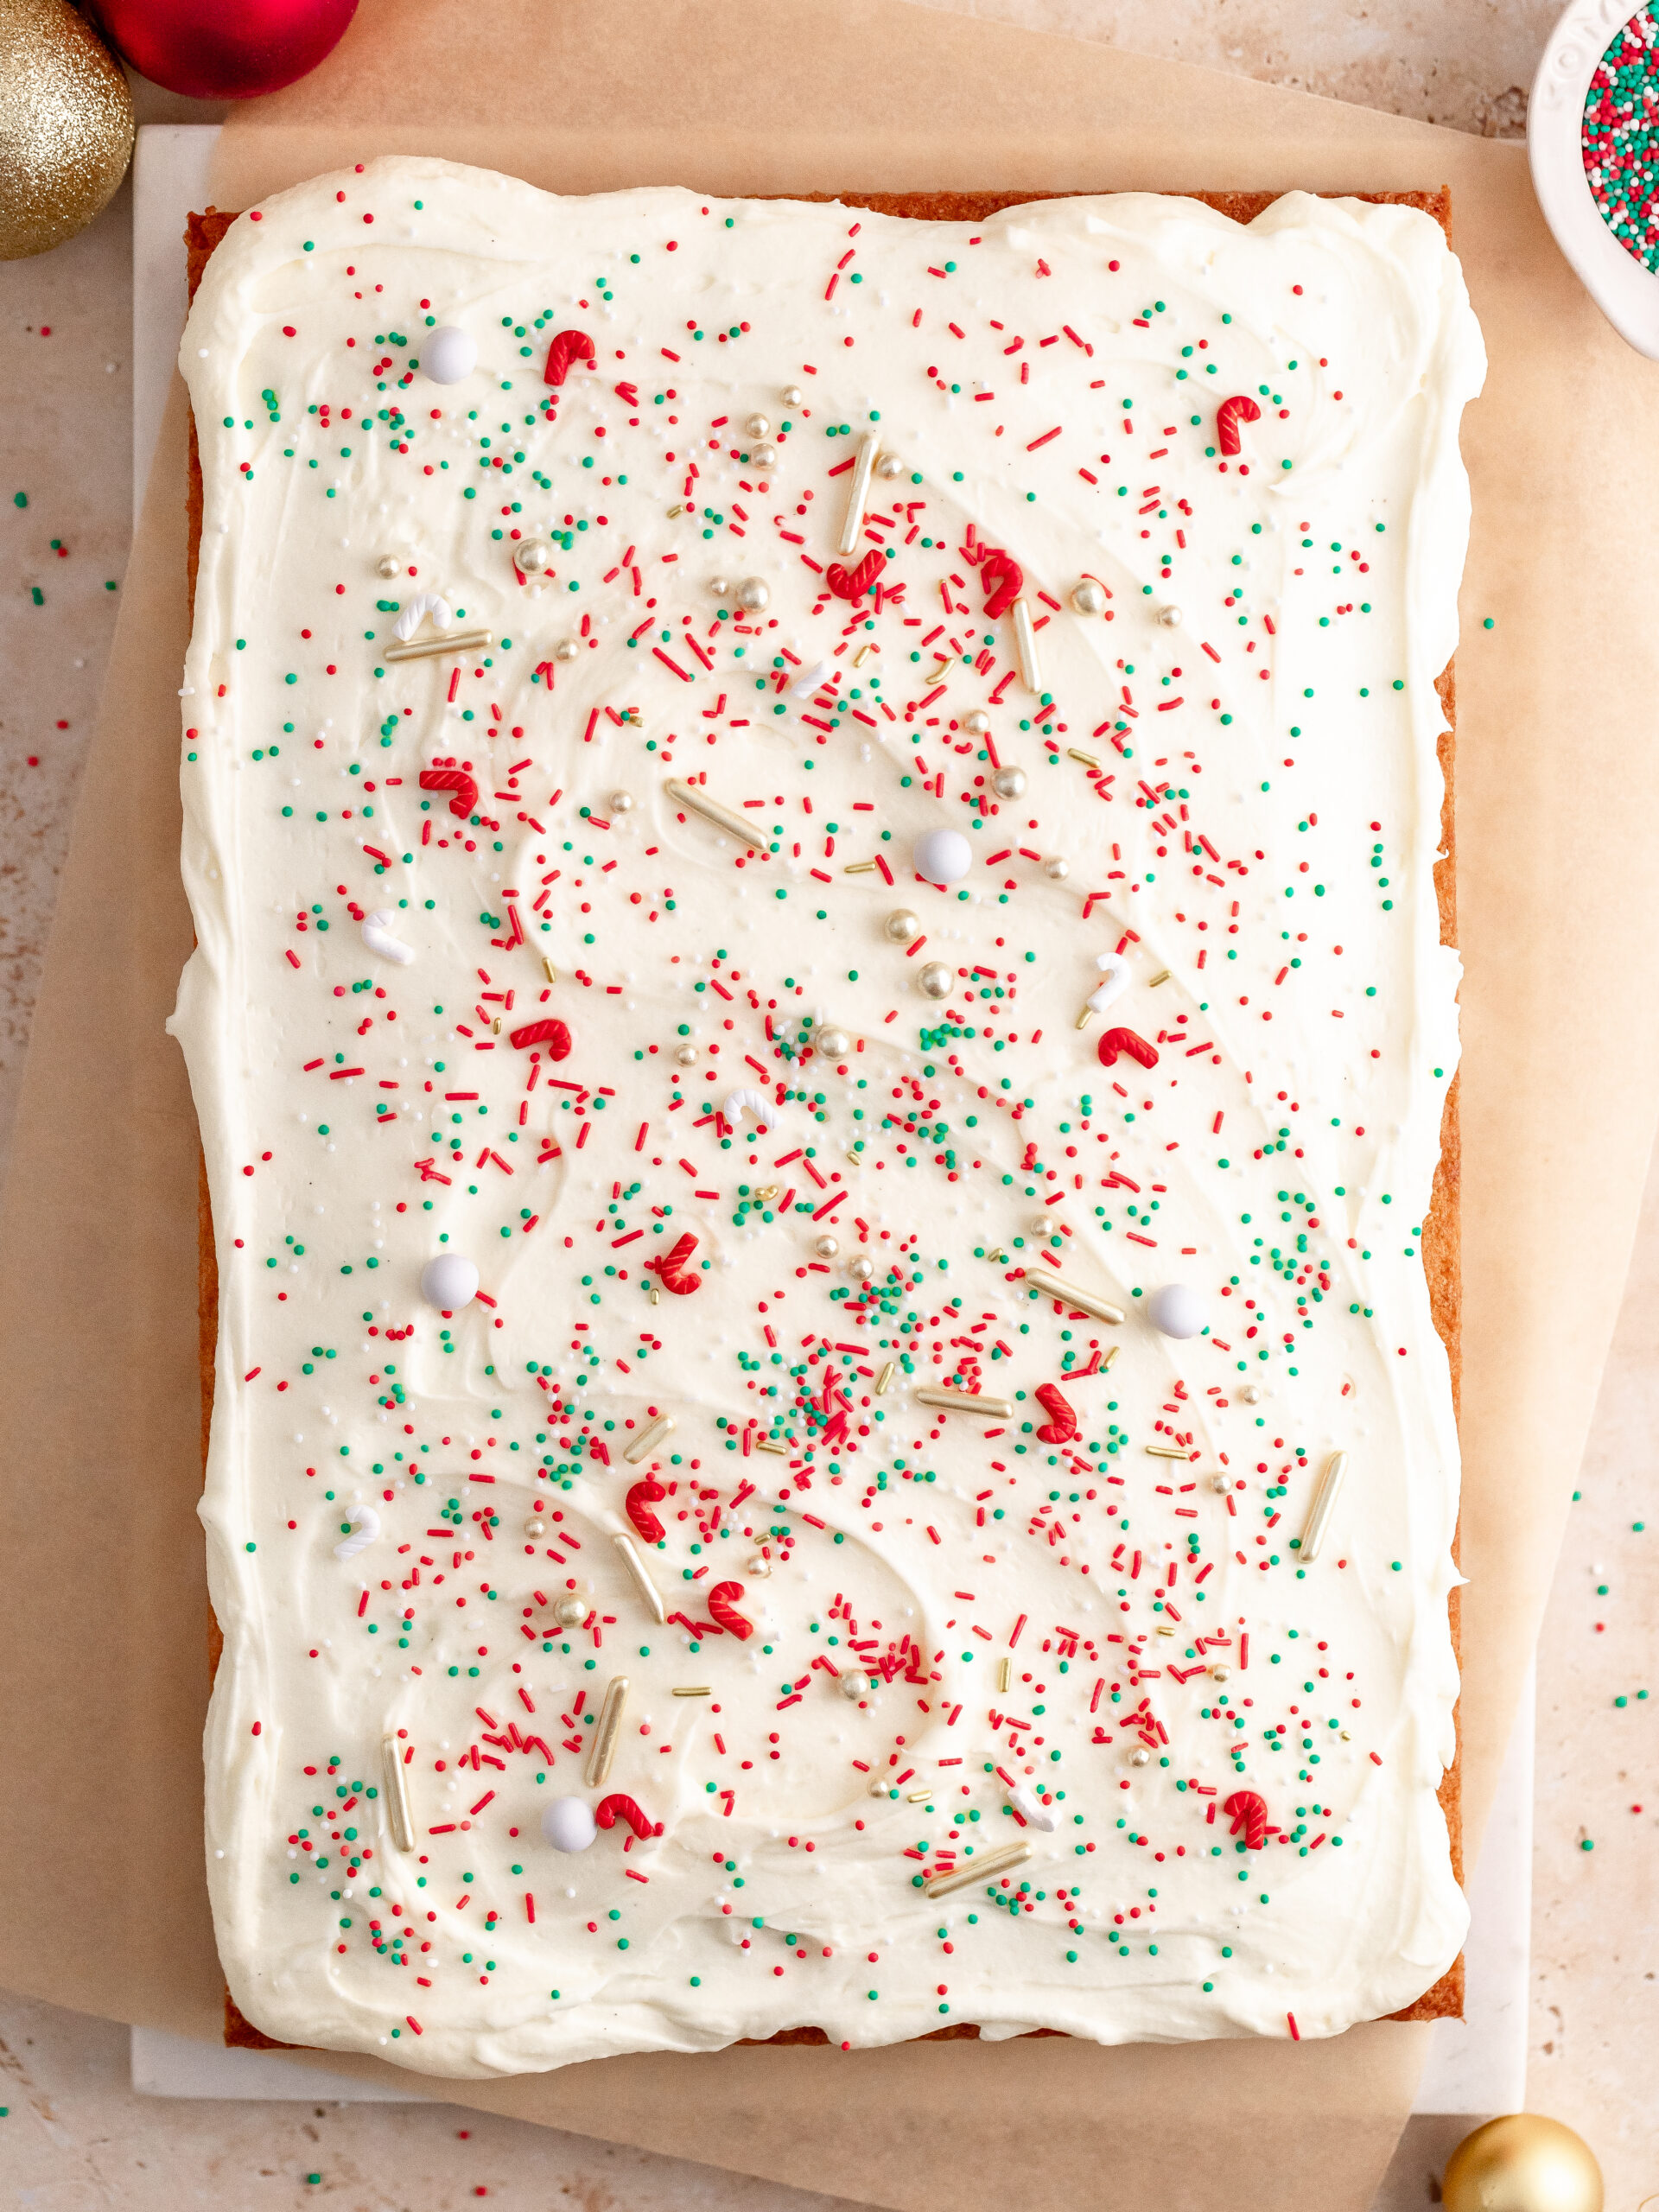 Step 5: Add the frosting to the cake and sprinkle it with Christmas sprinkles.